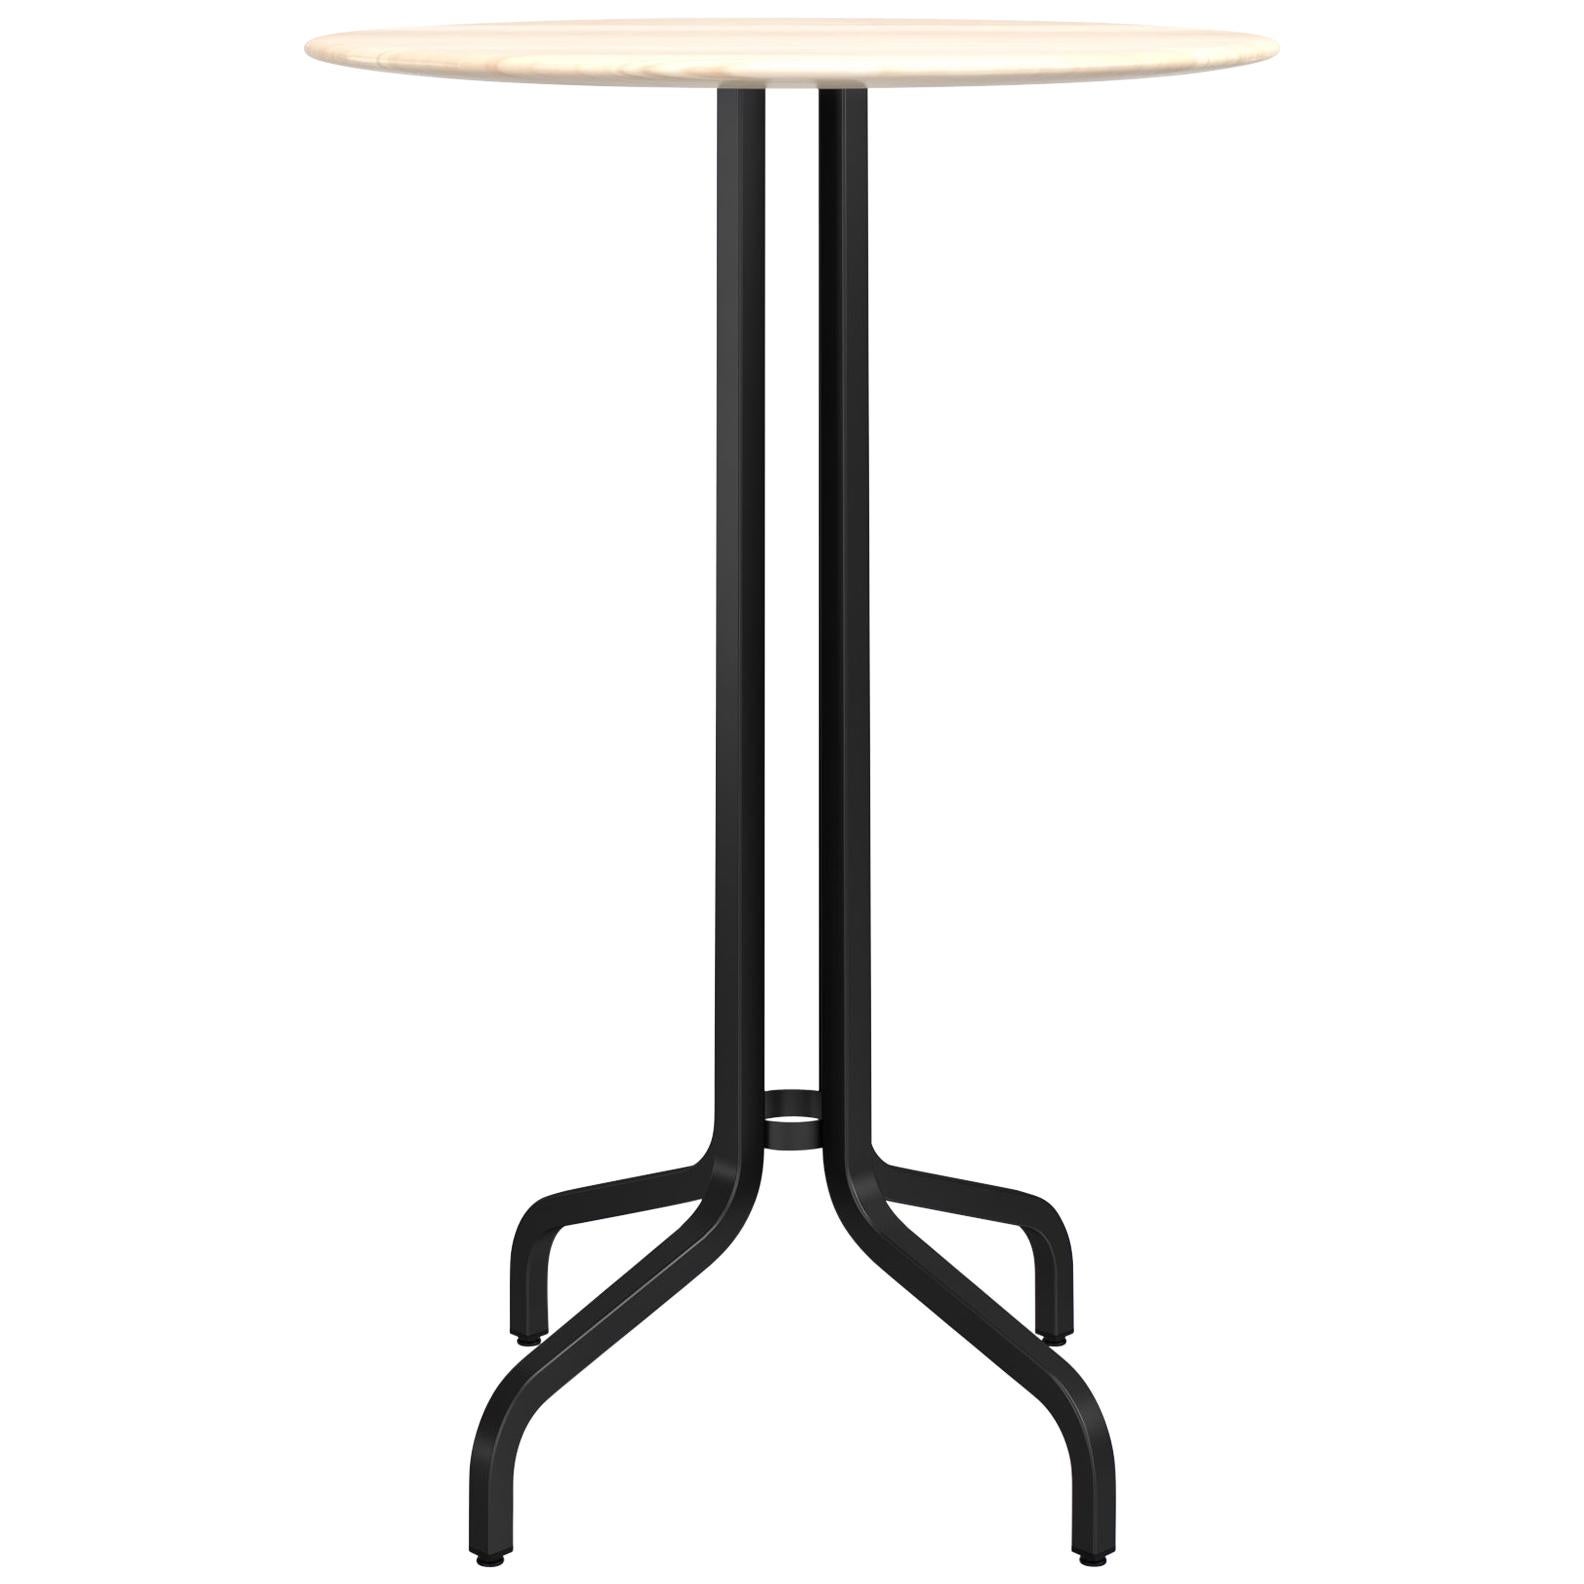 Emeco 1 Inch Large Round Bar Table with Black Legs & Wood Top by Jasper Morrison For Sale